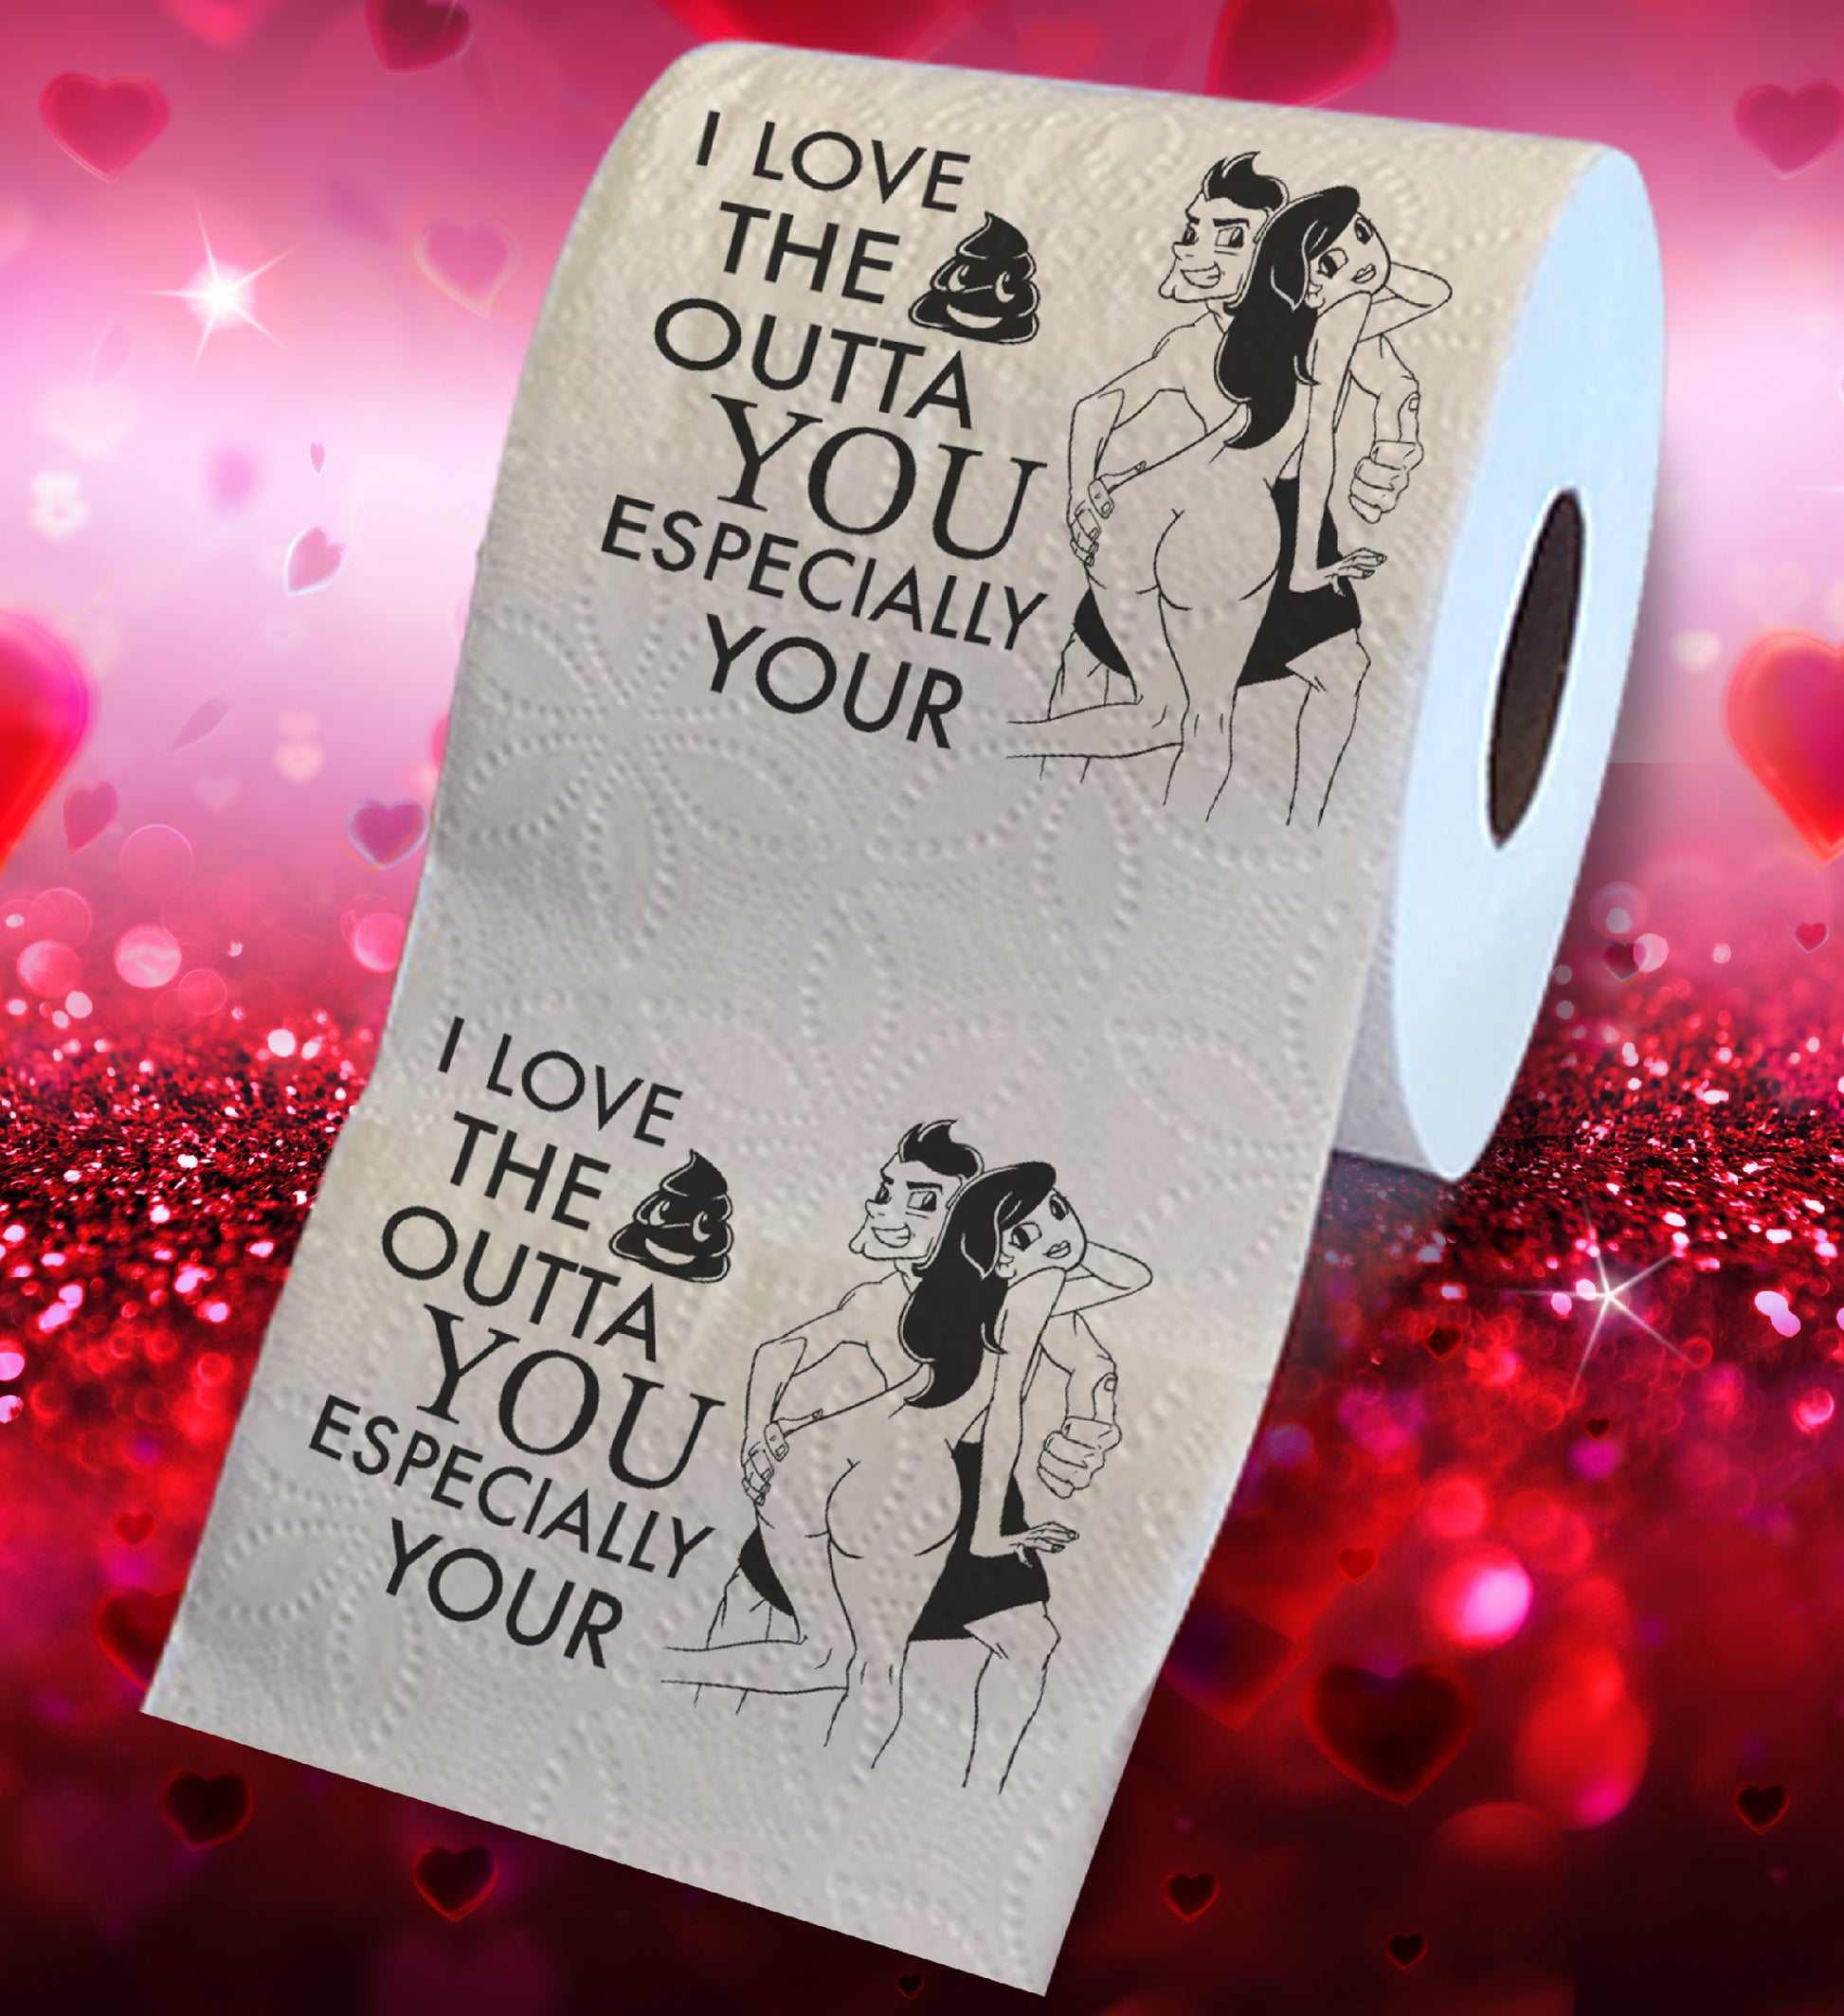 Printed TP I Don't Give A Sh*t About Valentine's Printed Toilet Paper Gag Gift - Funny Toilet Paper Roll for Prank, Bathroom Decor, Romantic Novelty